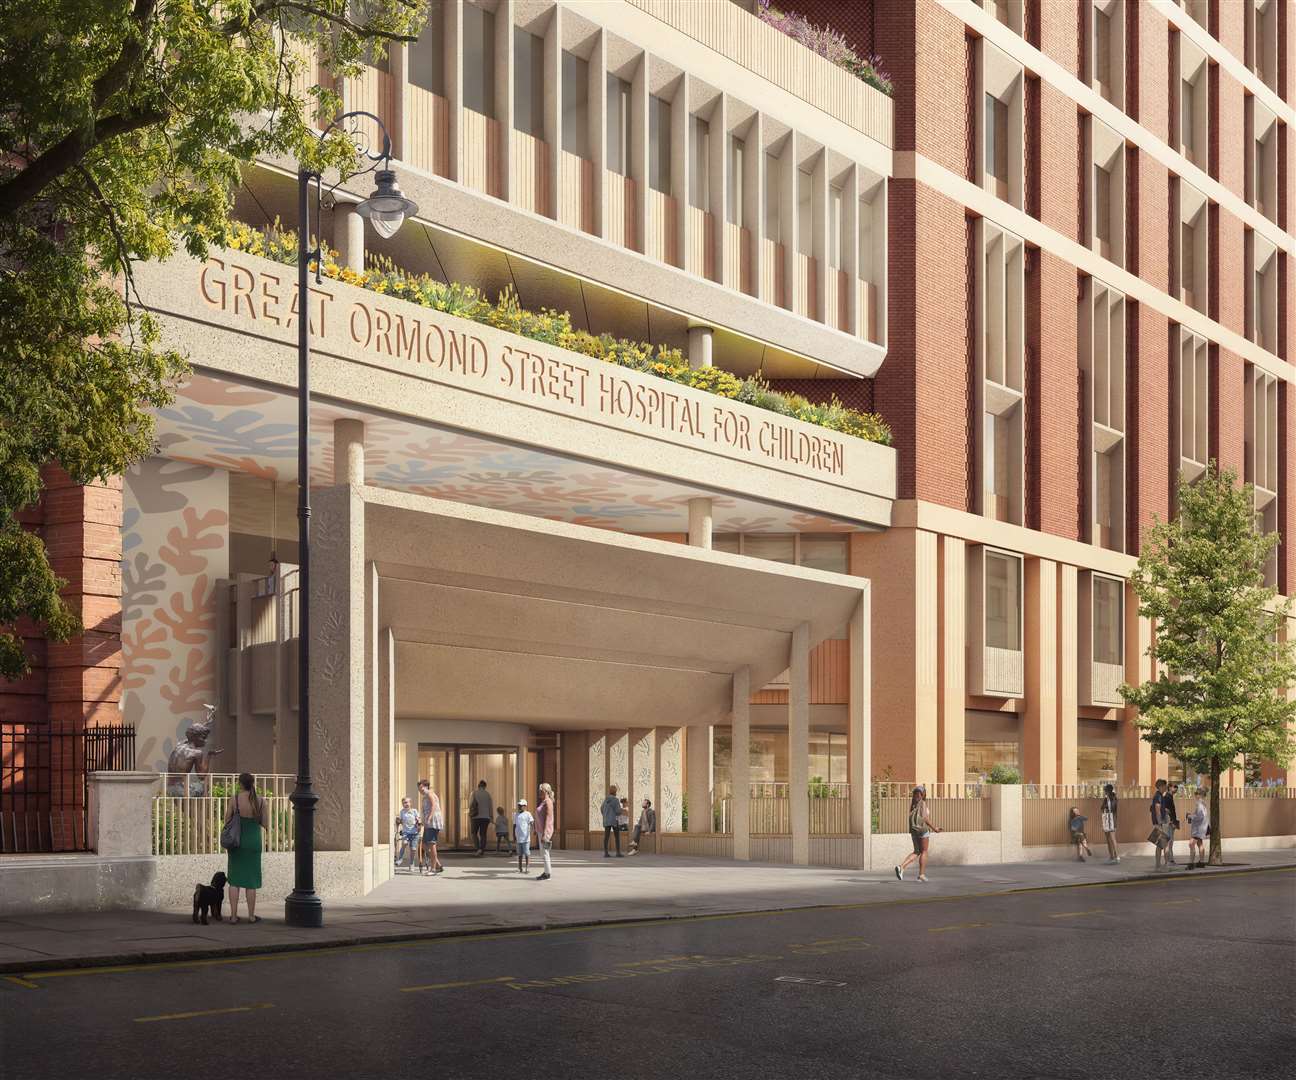 An artist’s impression of the new entrance to Great Ormond Street Hospital which will be redeveloped as part of a £300m project to build the new Children’s Cancer Centre (GOSH/PA)